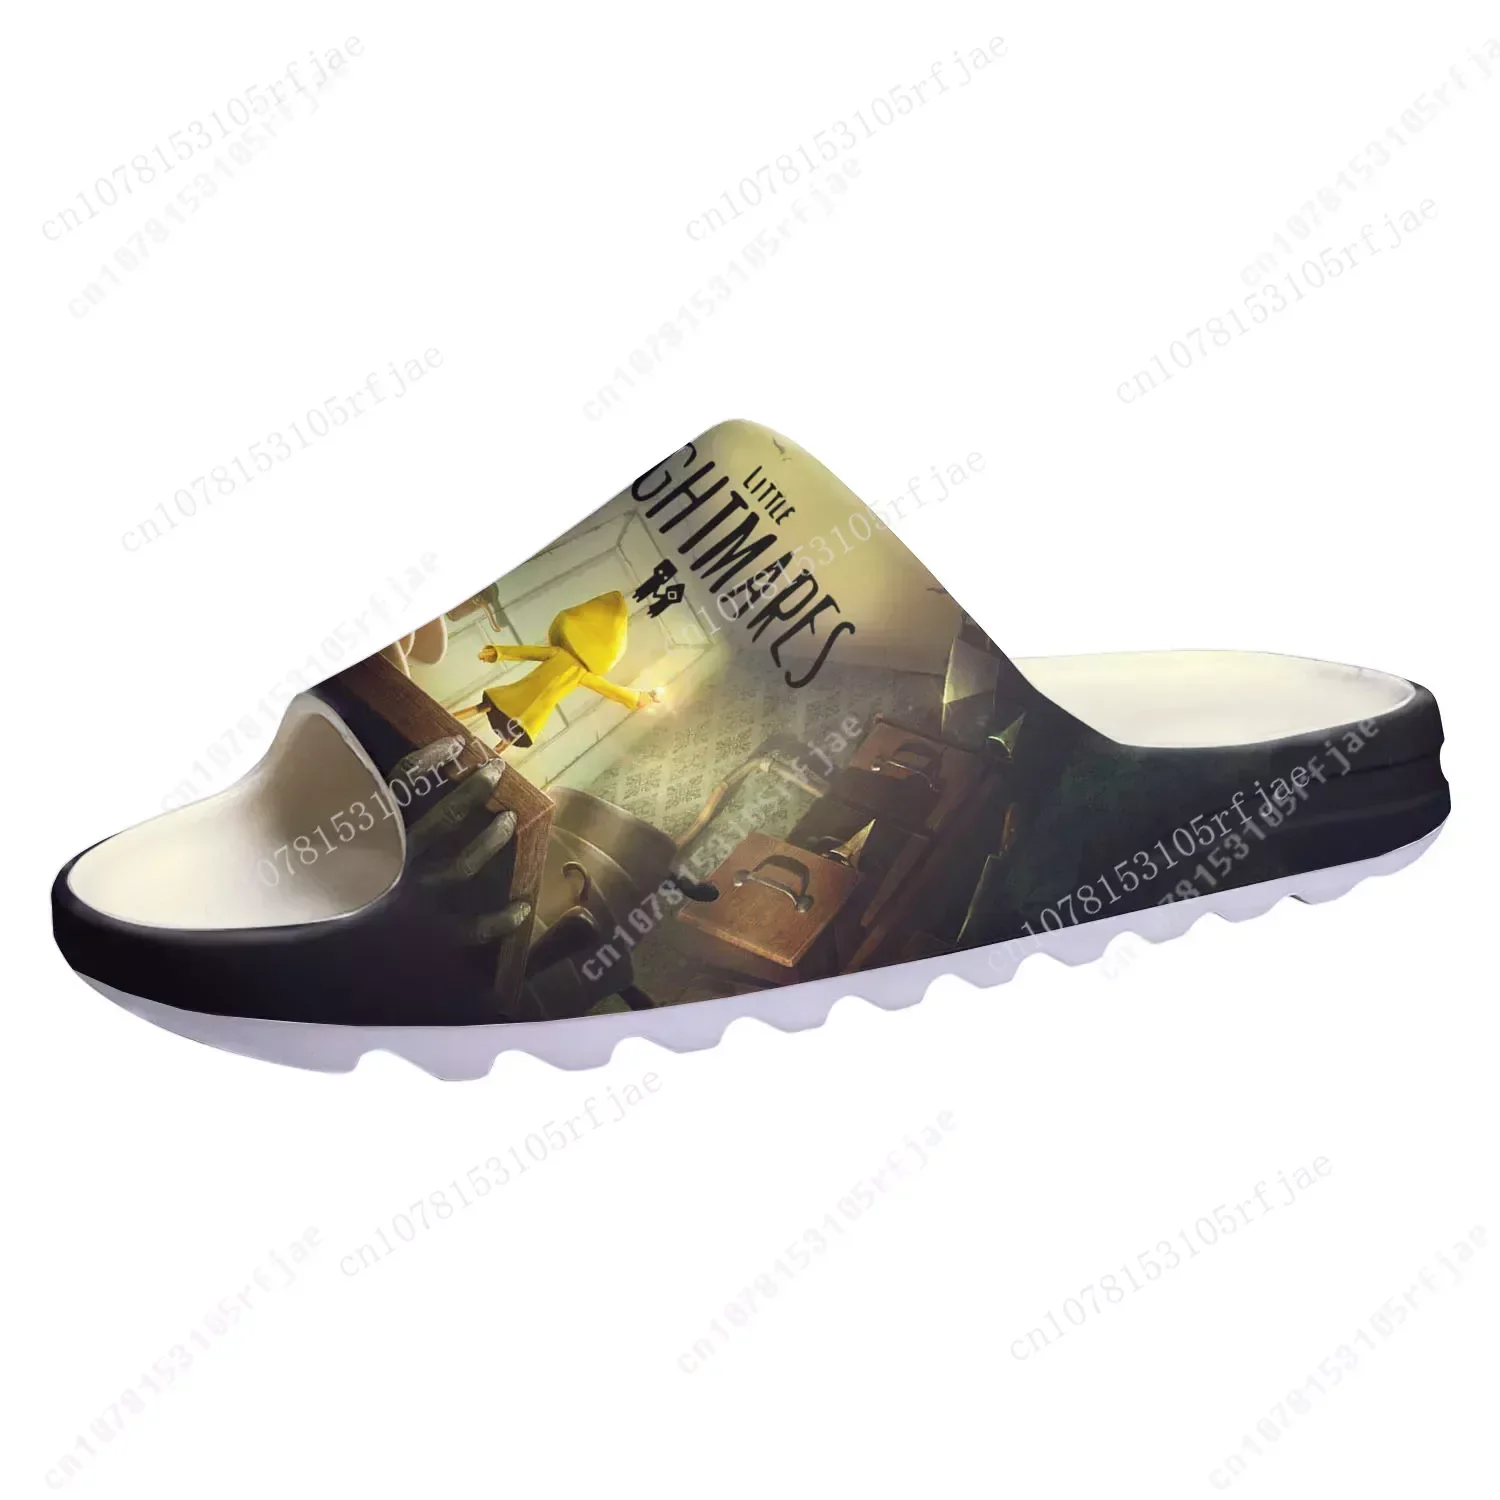 

Game Little Nightmares Cartoon Five Soft Sole Sllipers Mens Womens Teenager Home Clogs Custom Water Shoes on Shit Sandals